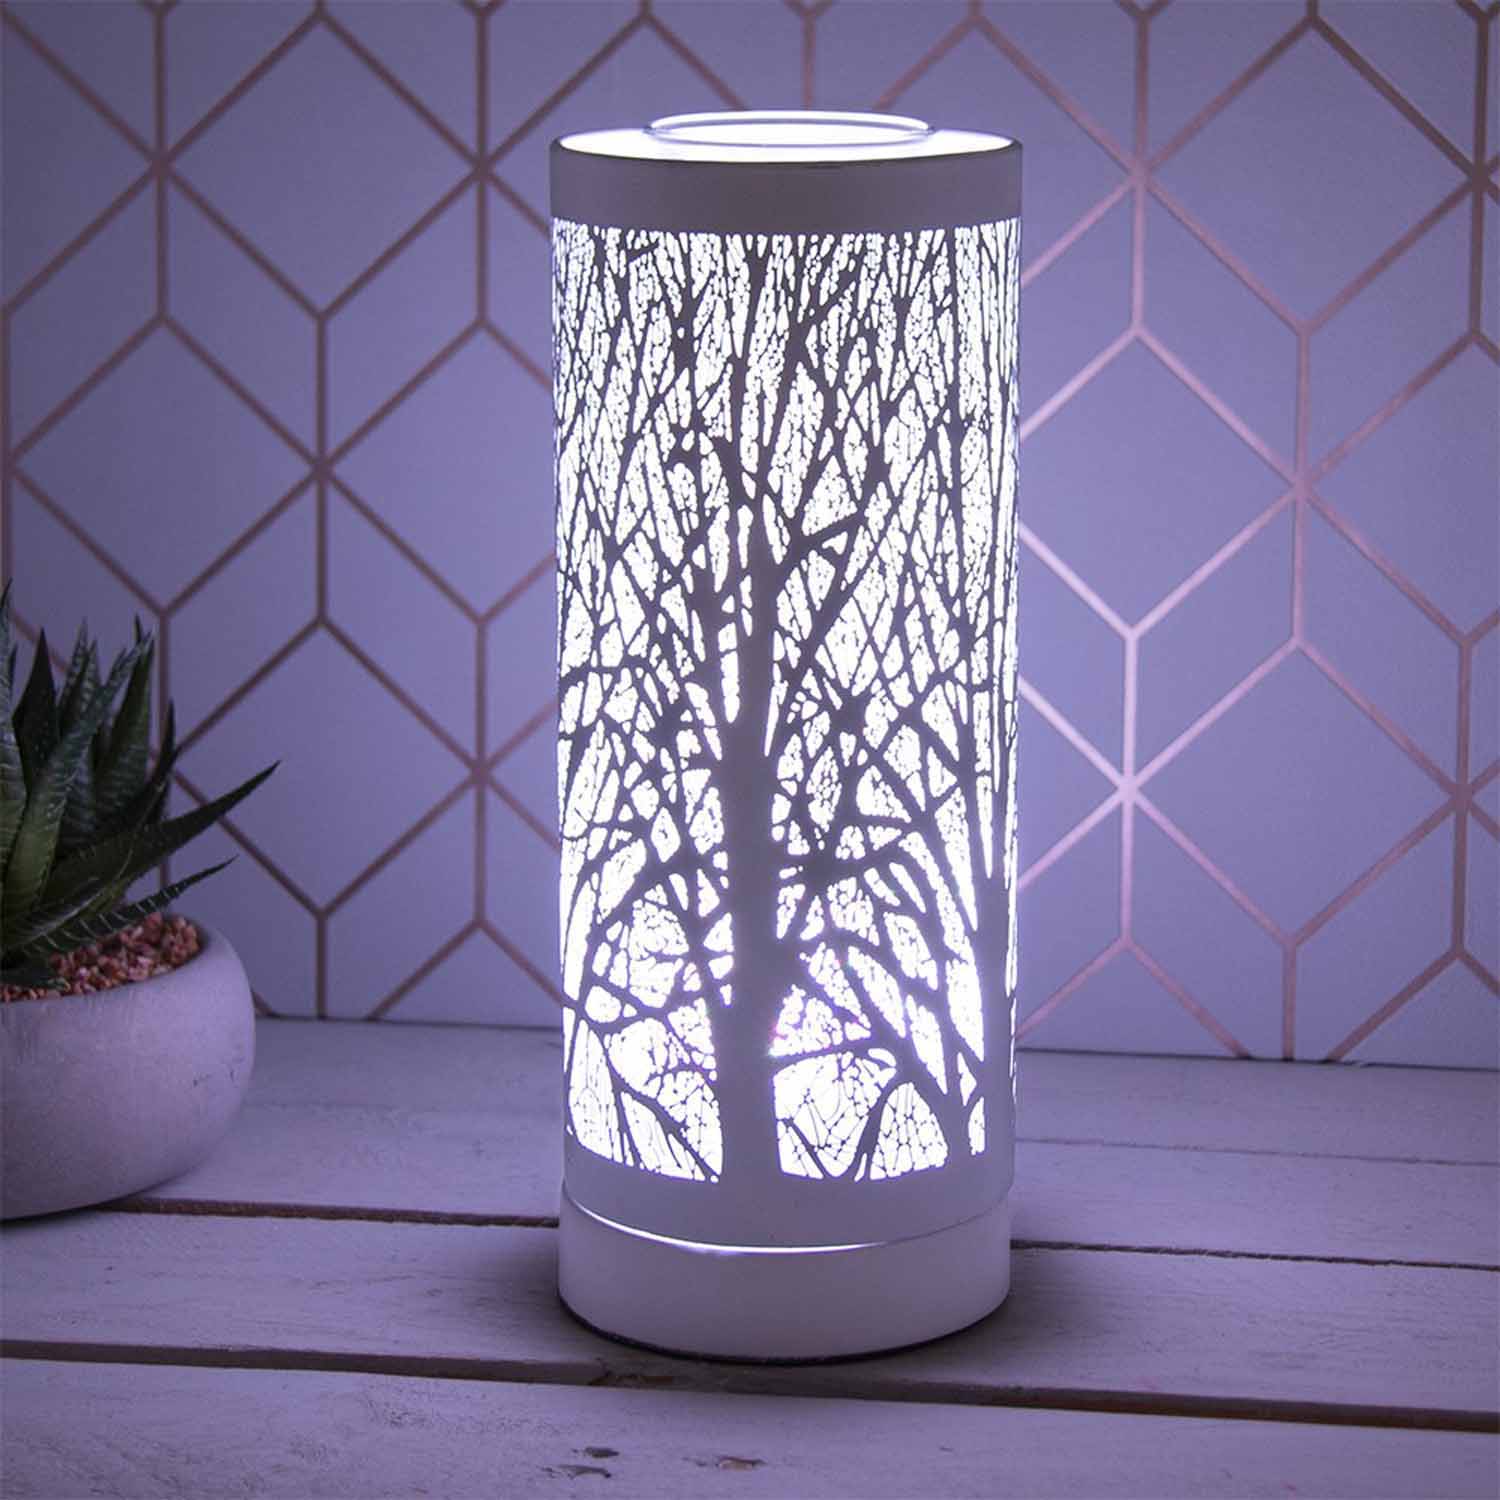 The Home Collection LED Colour Changing Aroma Lamp - White 1 Shaws Department Stores